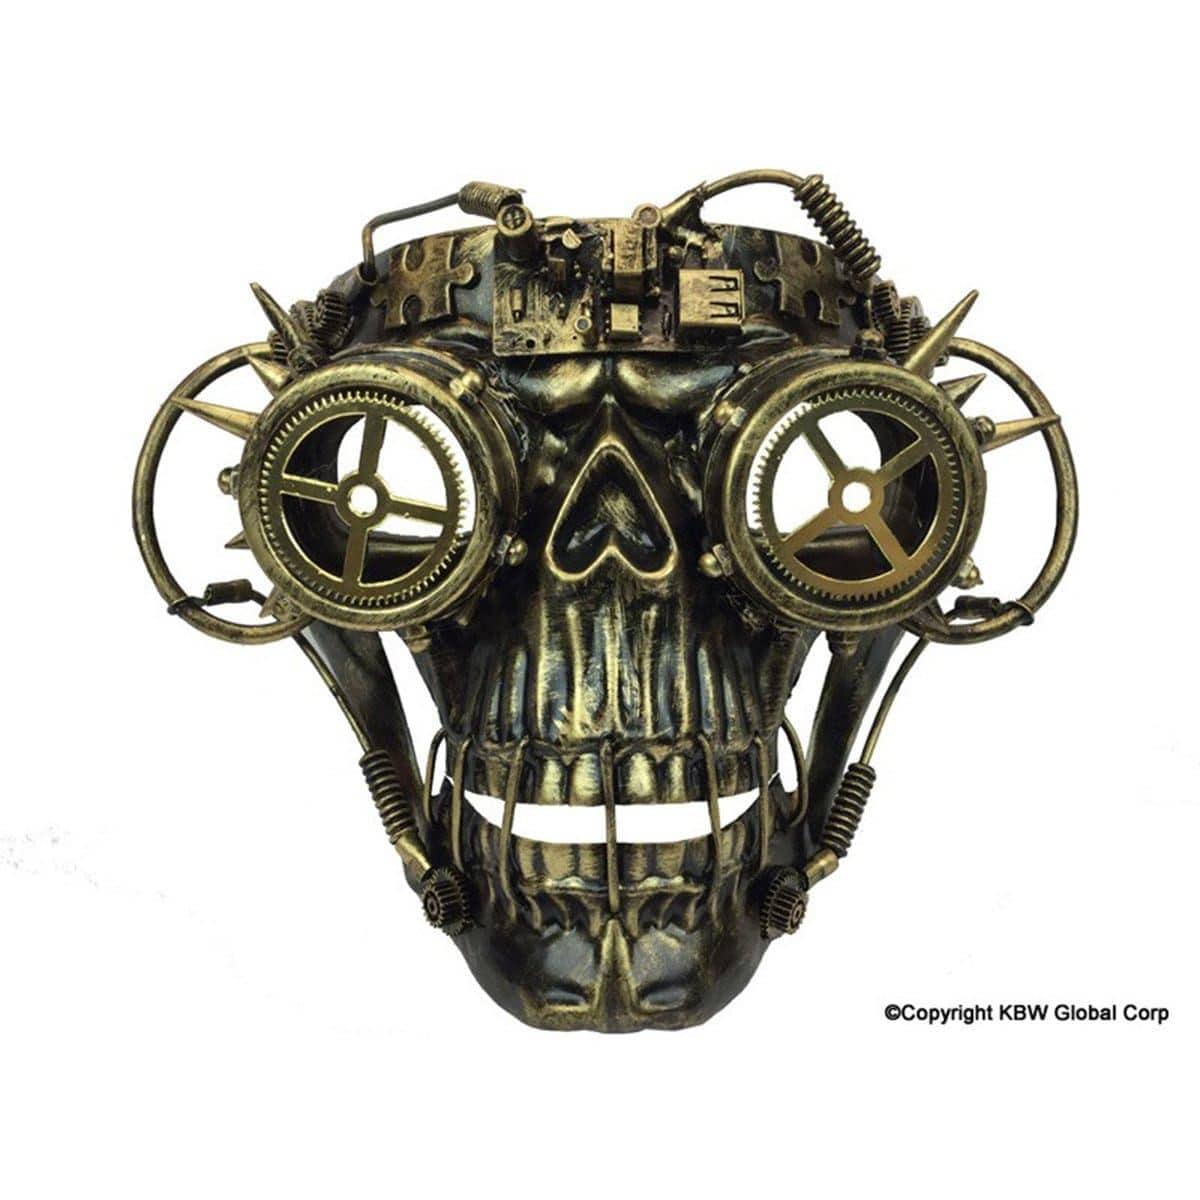 Buy Costume Accessories Gold steampunk skull mask with goggles sold at Party Expert